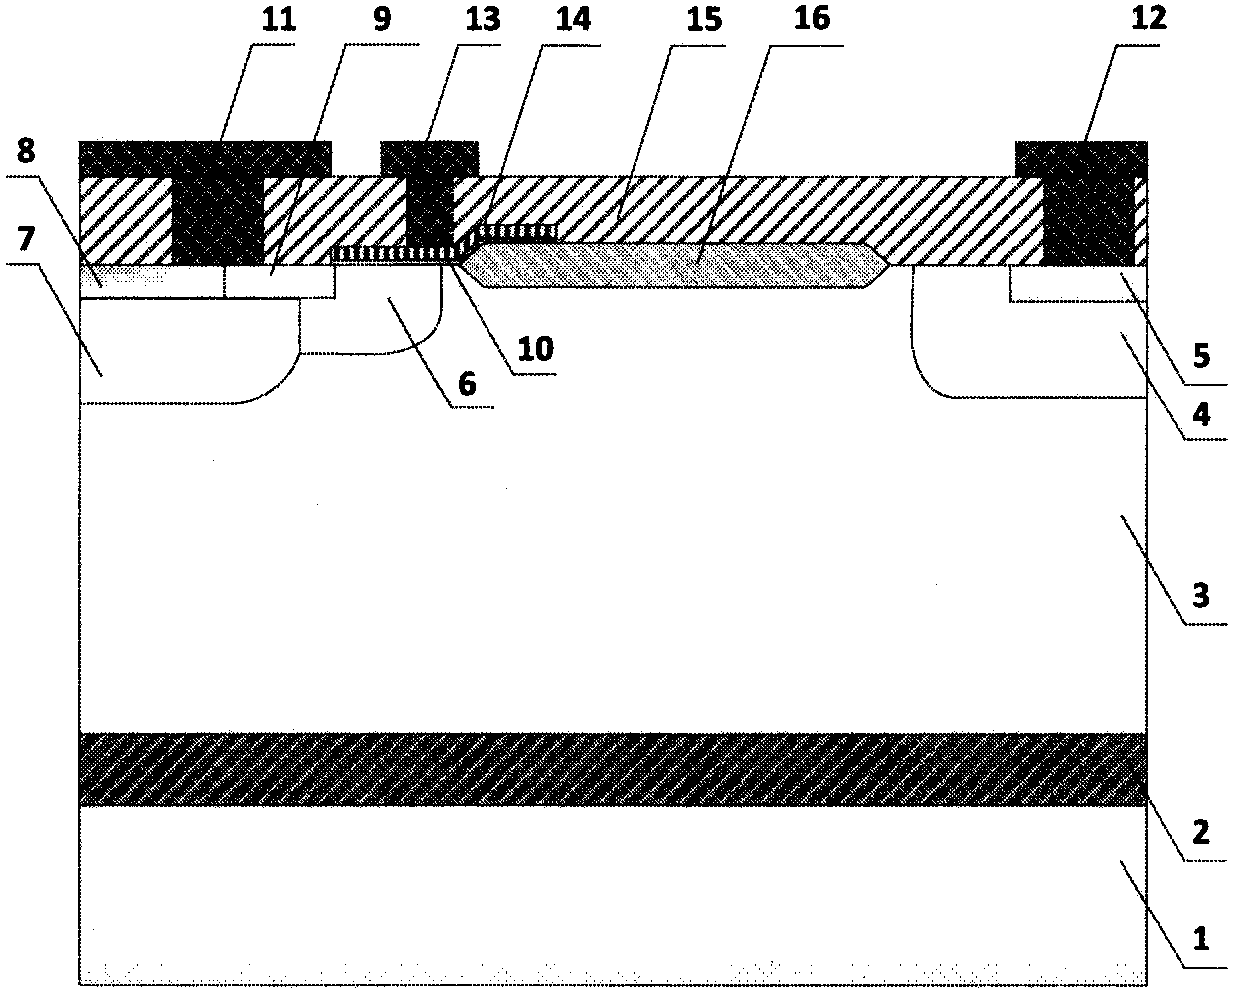 Novel power semiconductor device